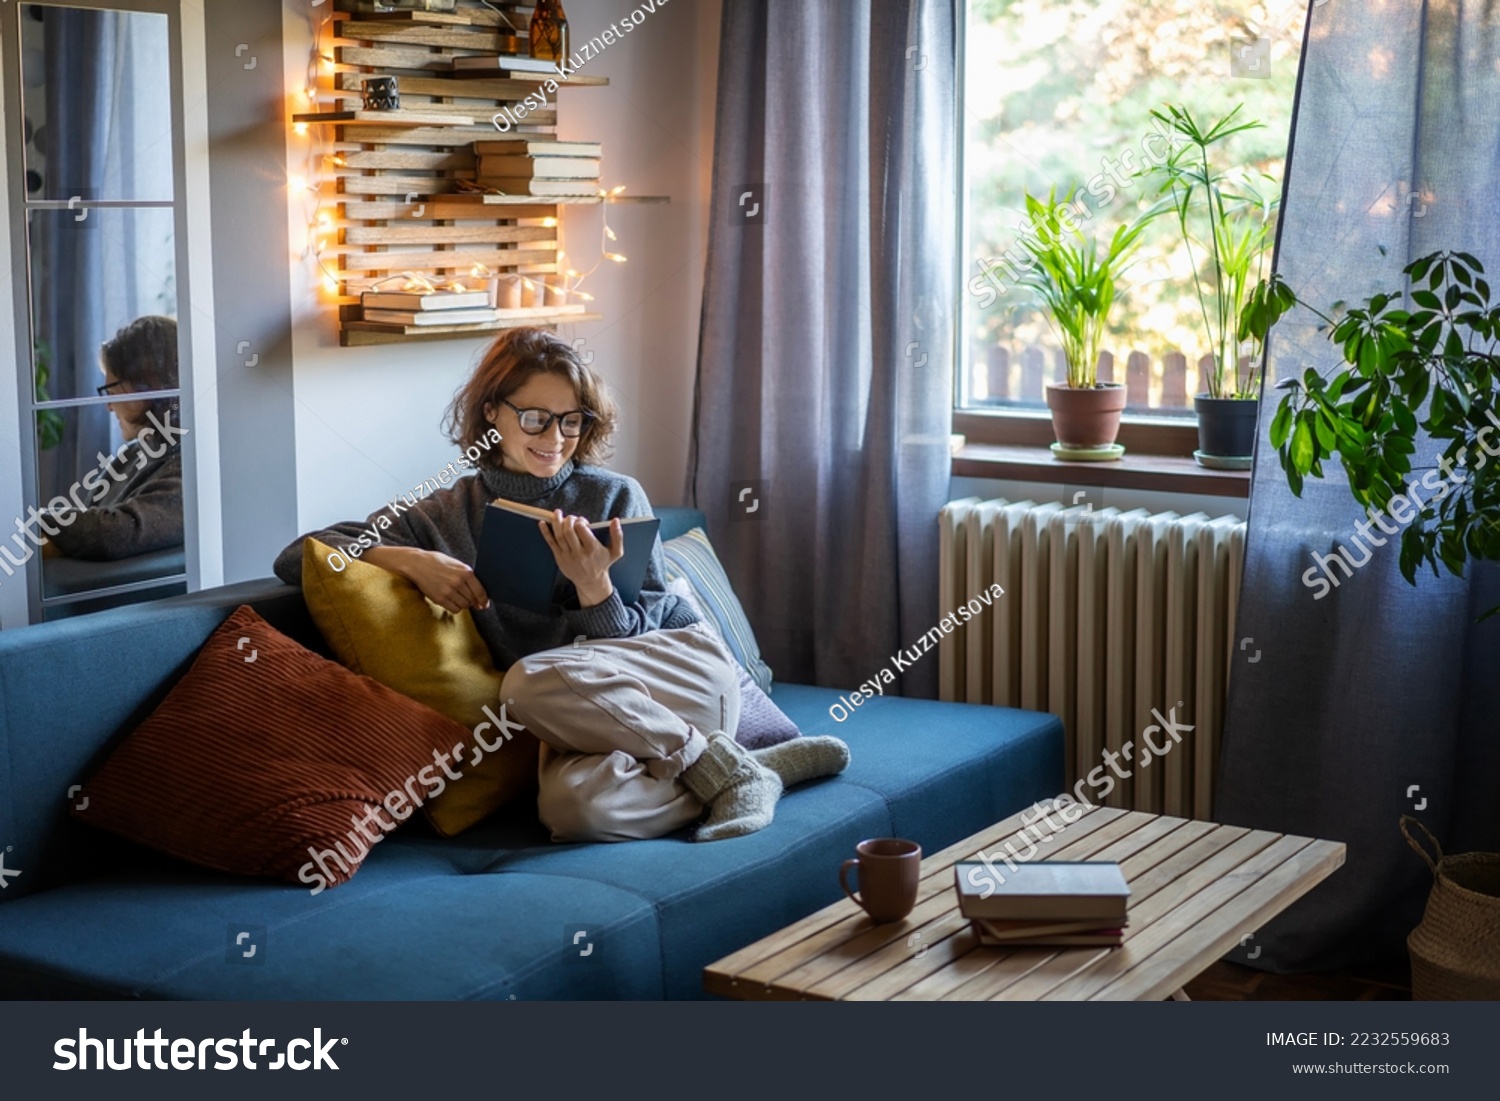 Young smiling cheerful woman in a warm sweater reading a book while sitting on the couch #2232559683